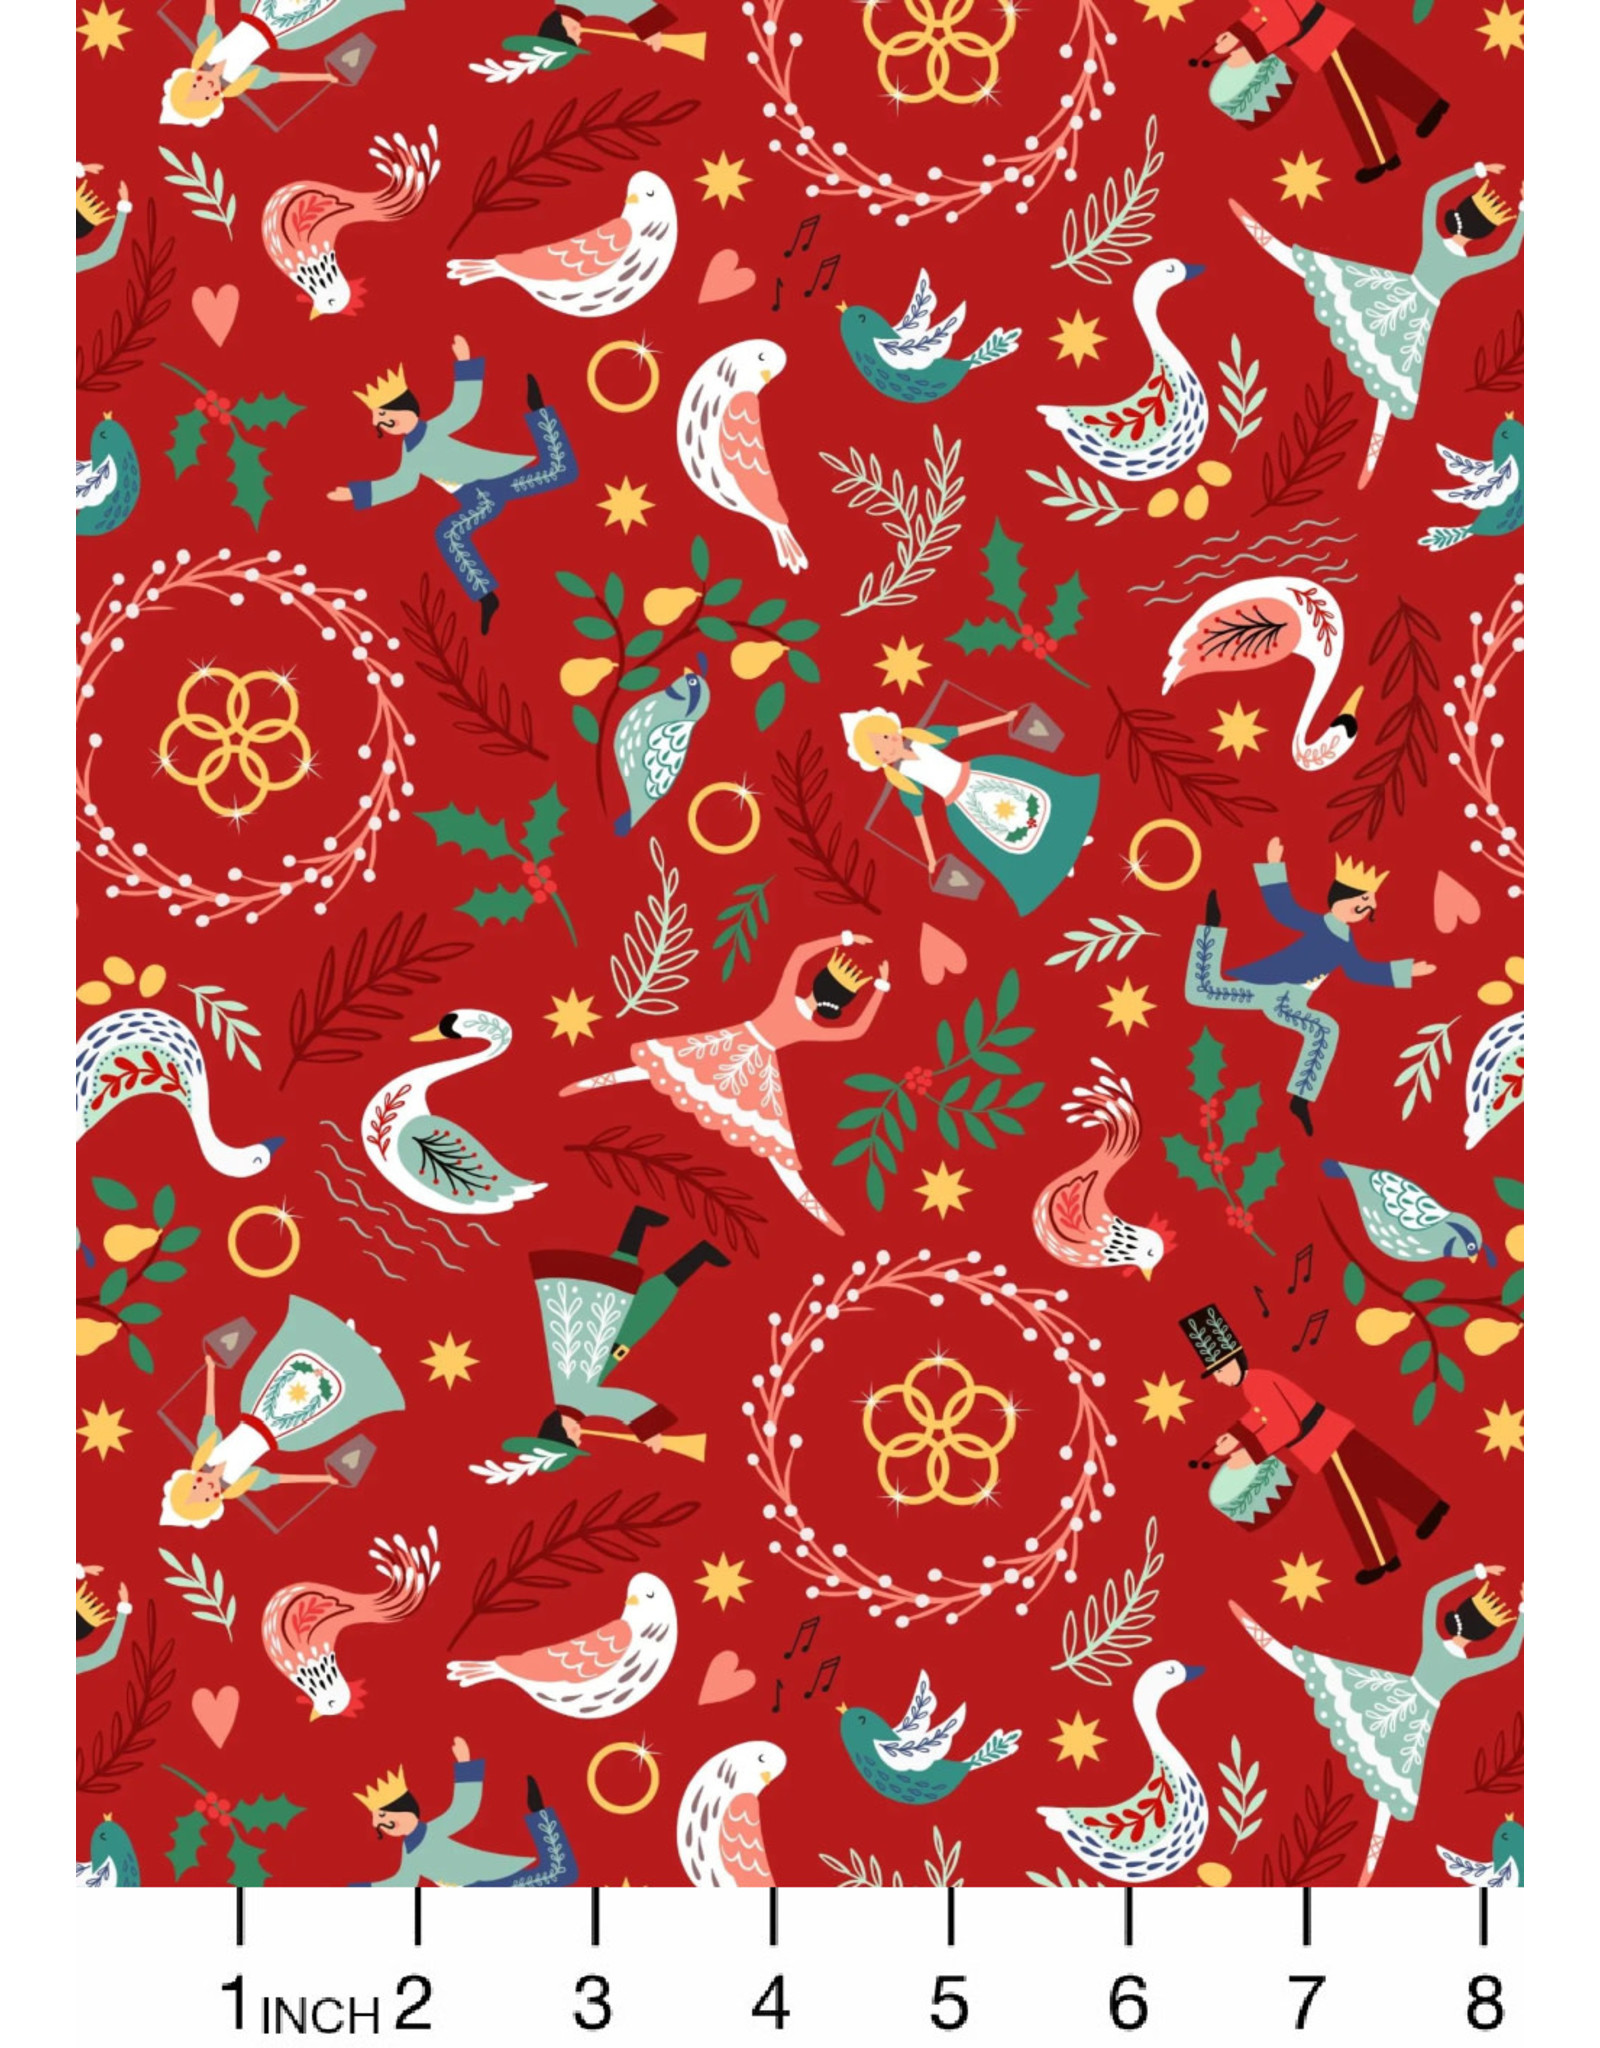 Christmas Collection The 12 Days of Christmas, Lords a Leaping on Red, Dinner Napkin